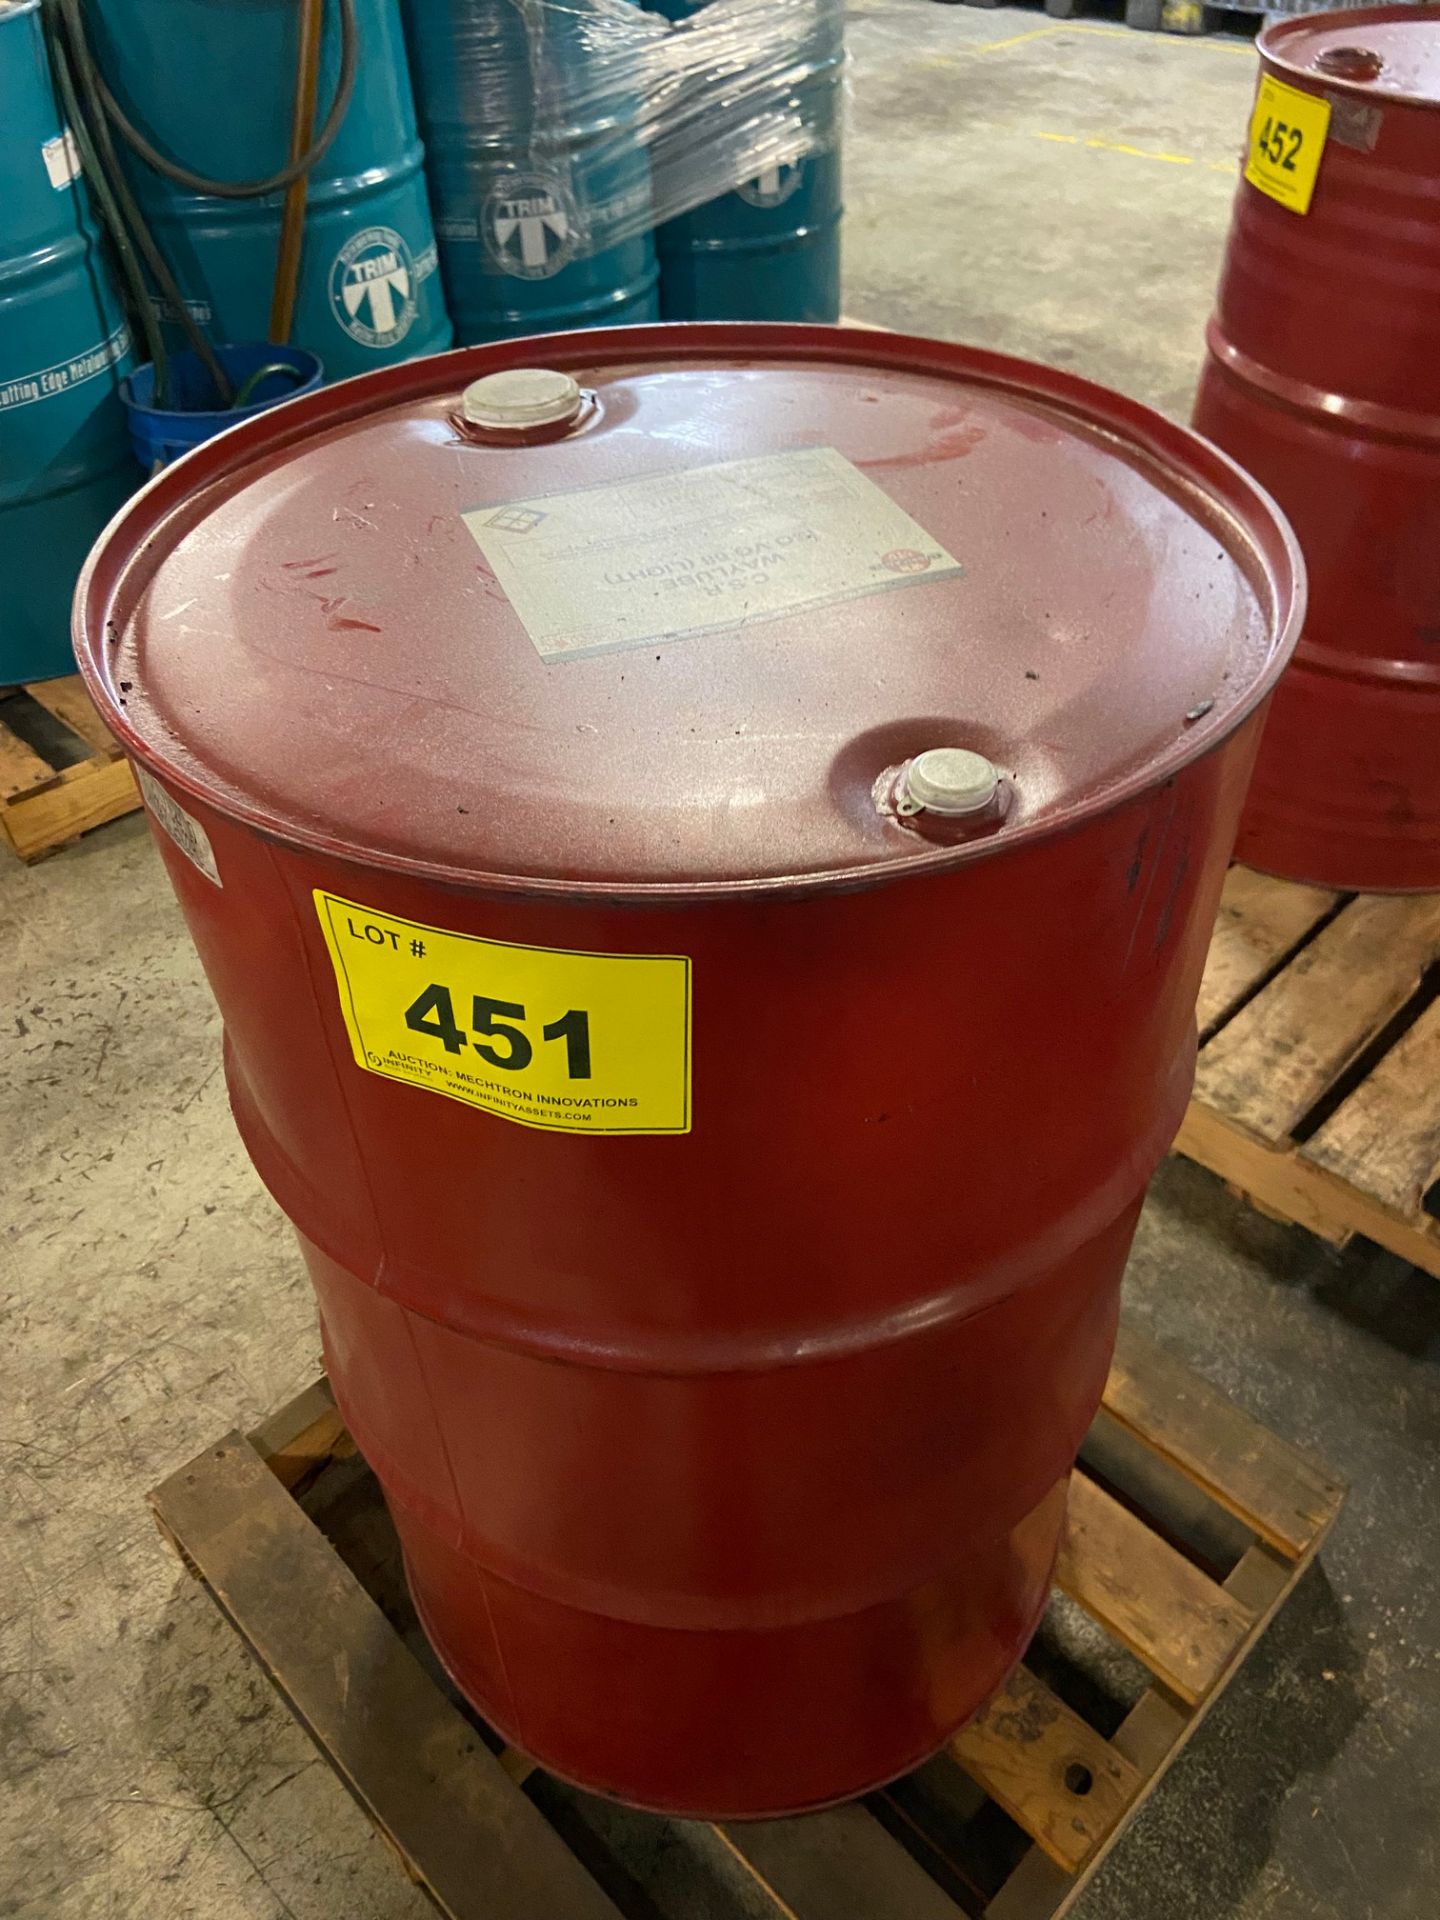 45 GALLON DRUM OF C.S.R. WYLUBE ISO VG65 (LIGHT) LUBRICANT